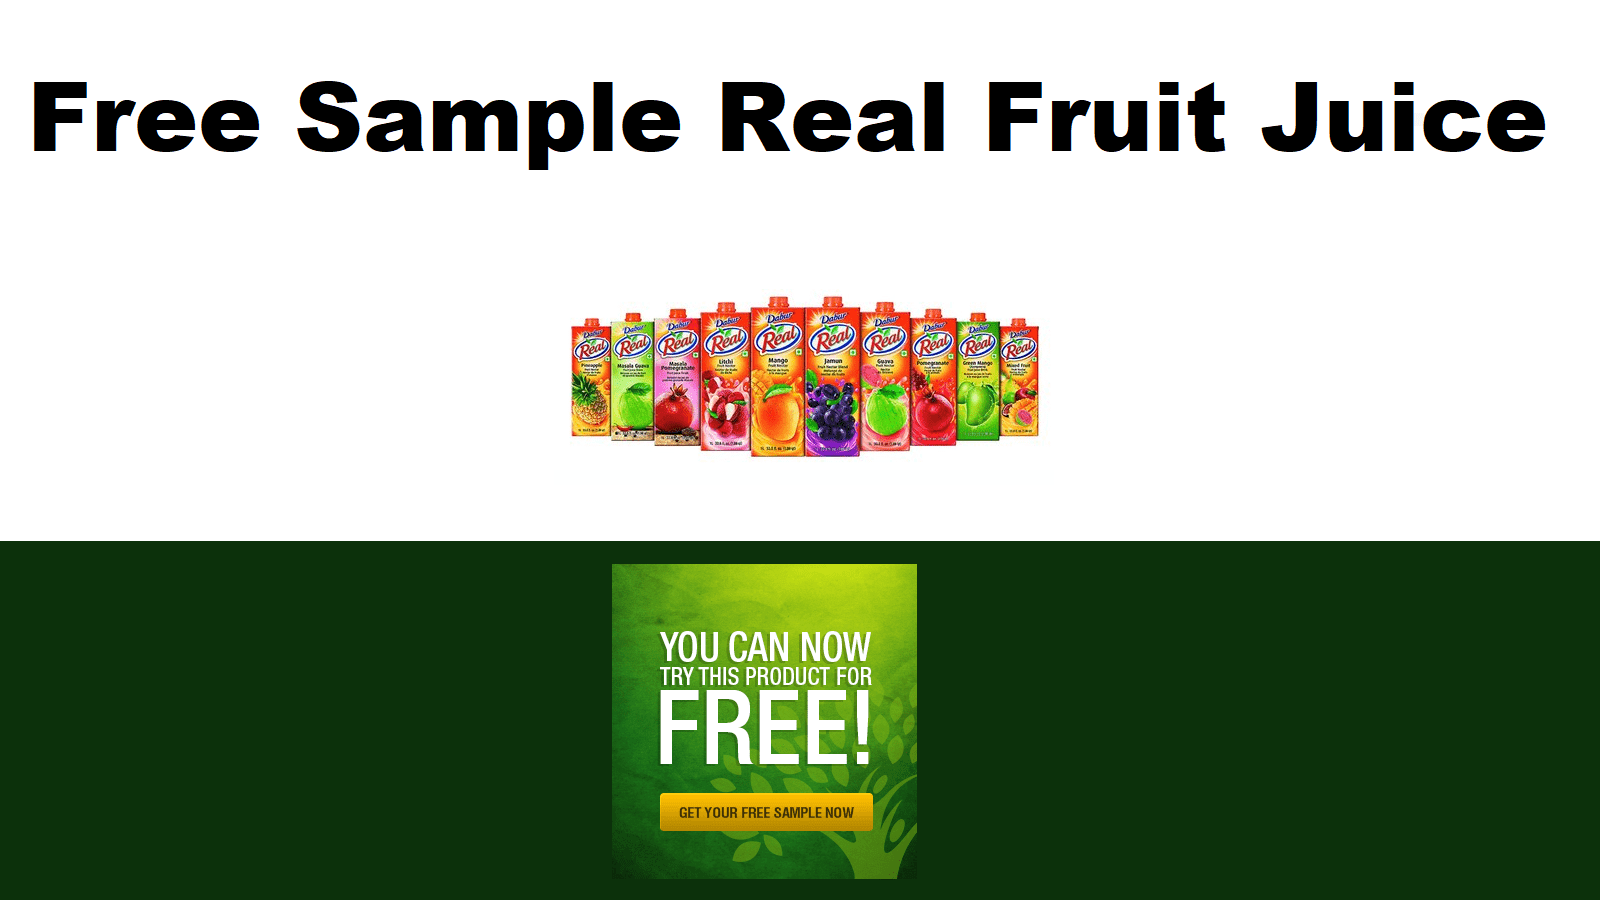 How to Get Free Sample of Real Fruit Power Juices form Dabur